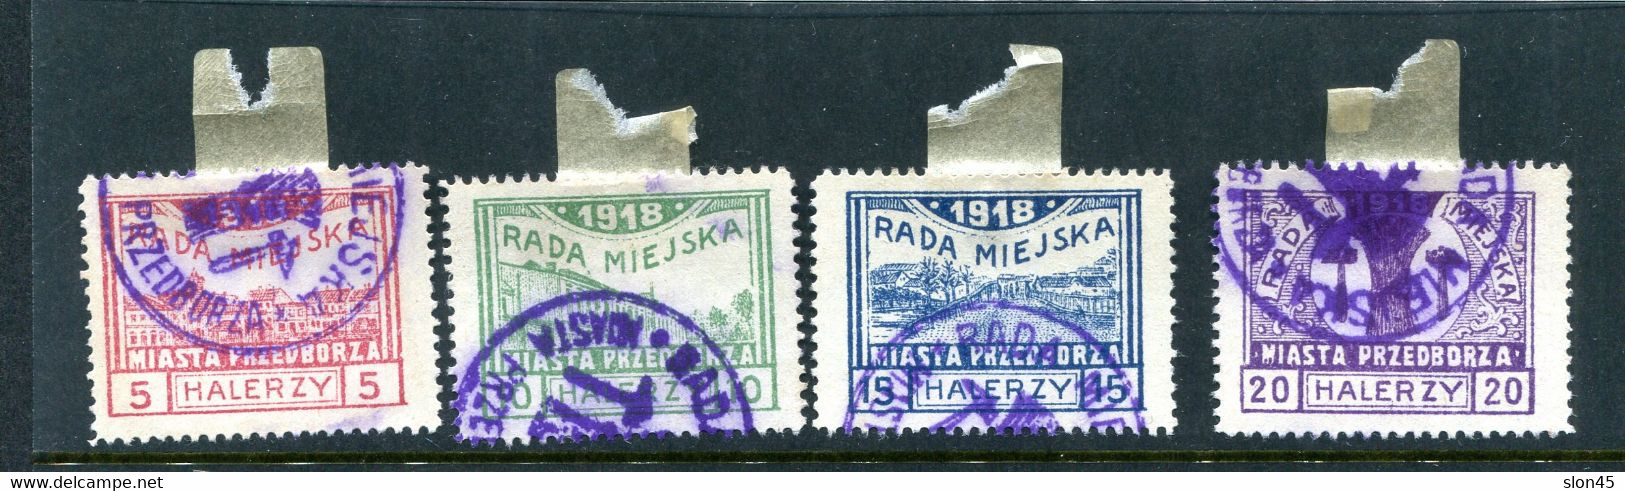 Poland 1918 Local 4 Stamps Used Mi 15-18 13693 - Used Stamps